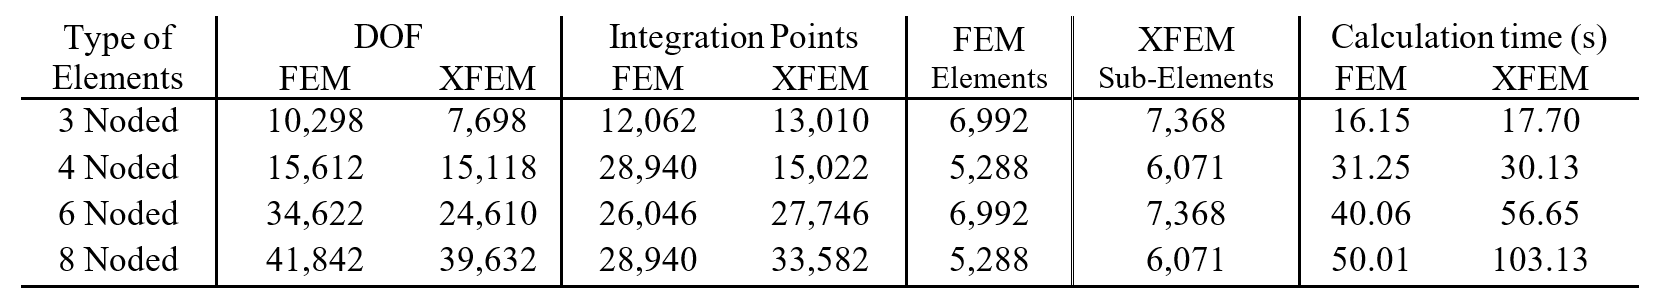 Table 4. Calculation details for both numerical schemes for different types of elements.